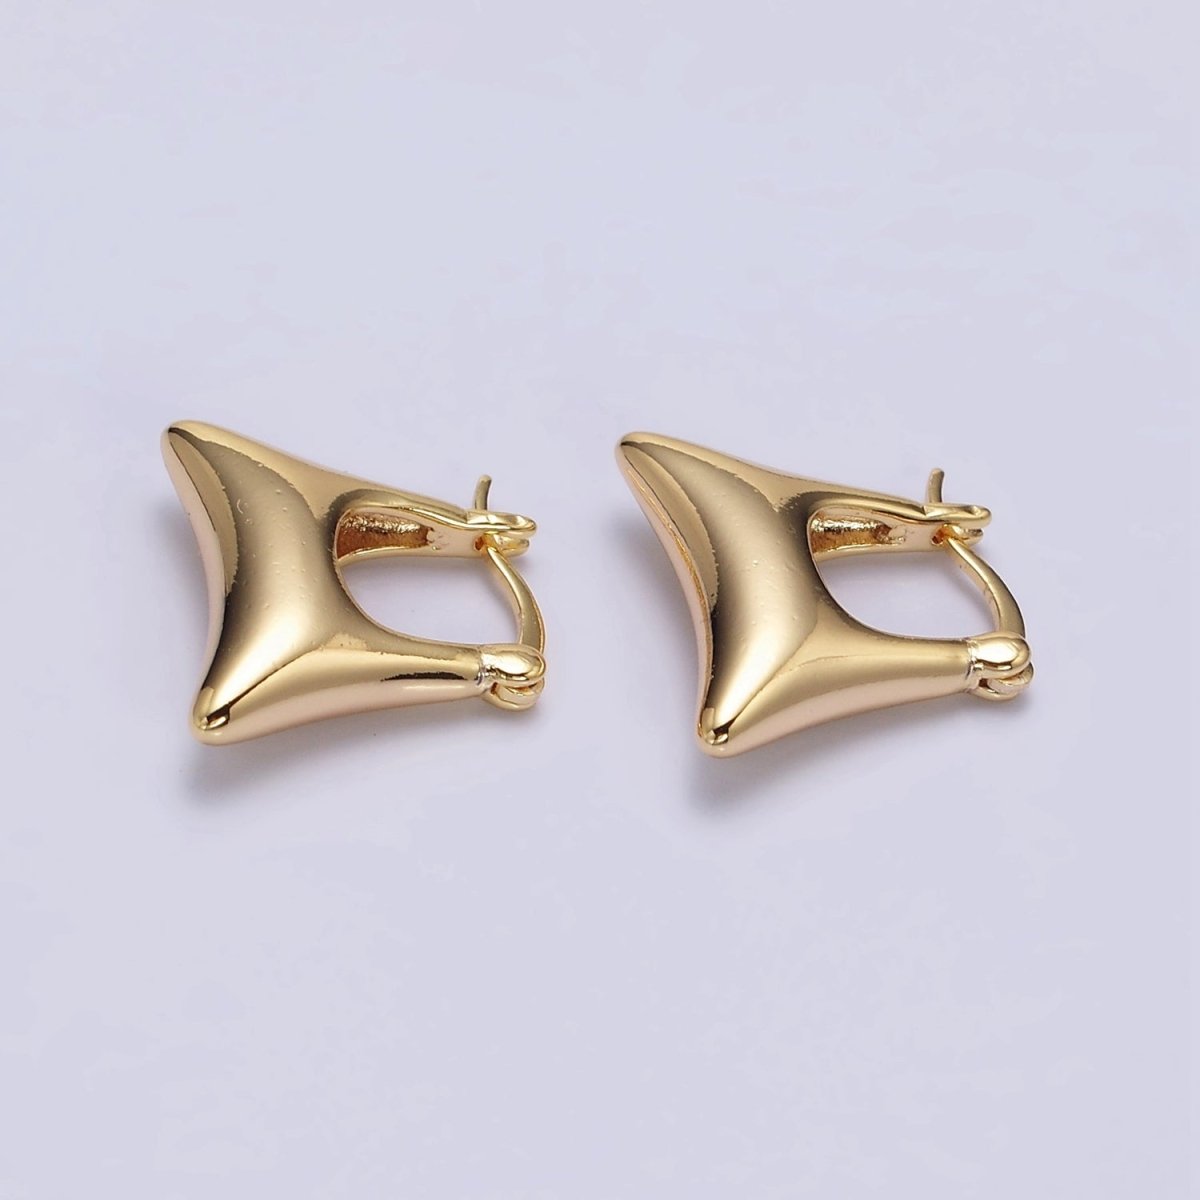 16K Gold Filled Curved Rectangular Chubby Dome French Lock Latch Earrings | AE089 - DLUXCA